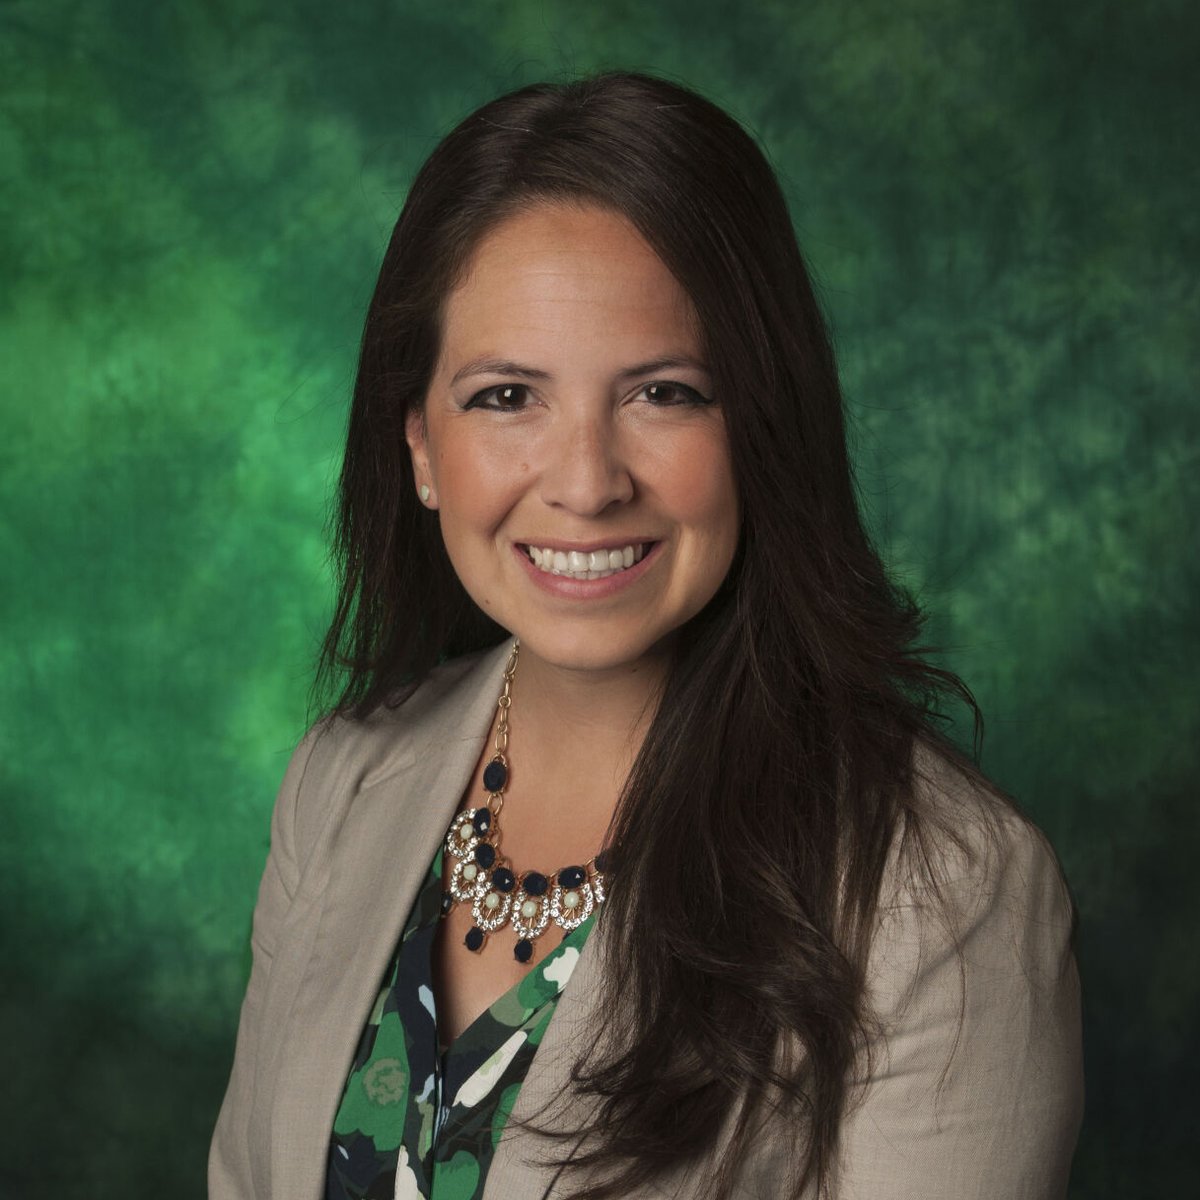 Shout out to DSA's own Dr. Hope Garcia from the UNT Frisco Campus for being featured in Denton County Magazine! Read about how Dr. Garcia helps students connect the dots and empowers them in the future at: studentaffairs.unt.edu/content/denton… #UNT #GMG #MeanGreenProud